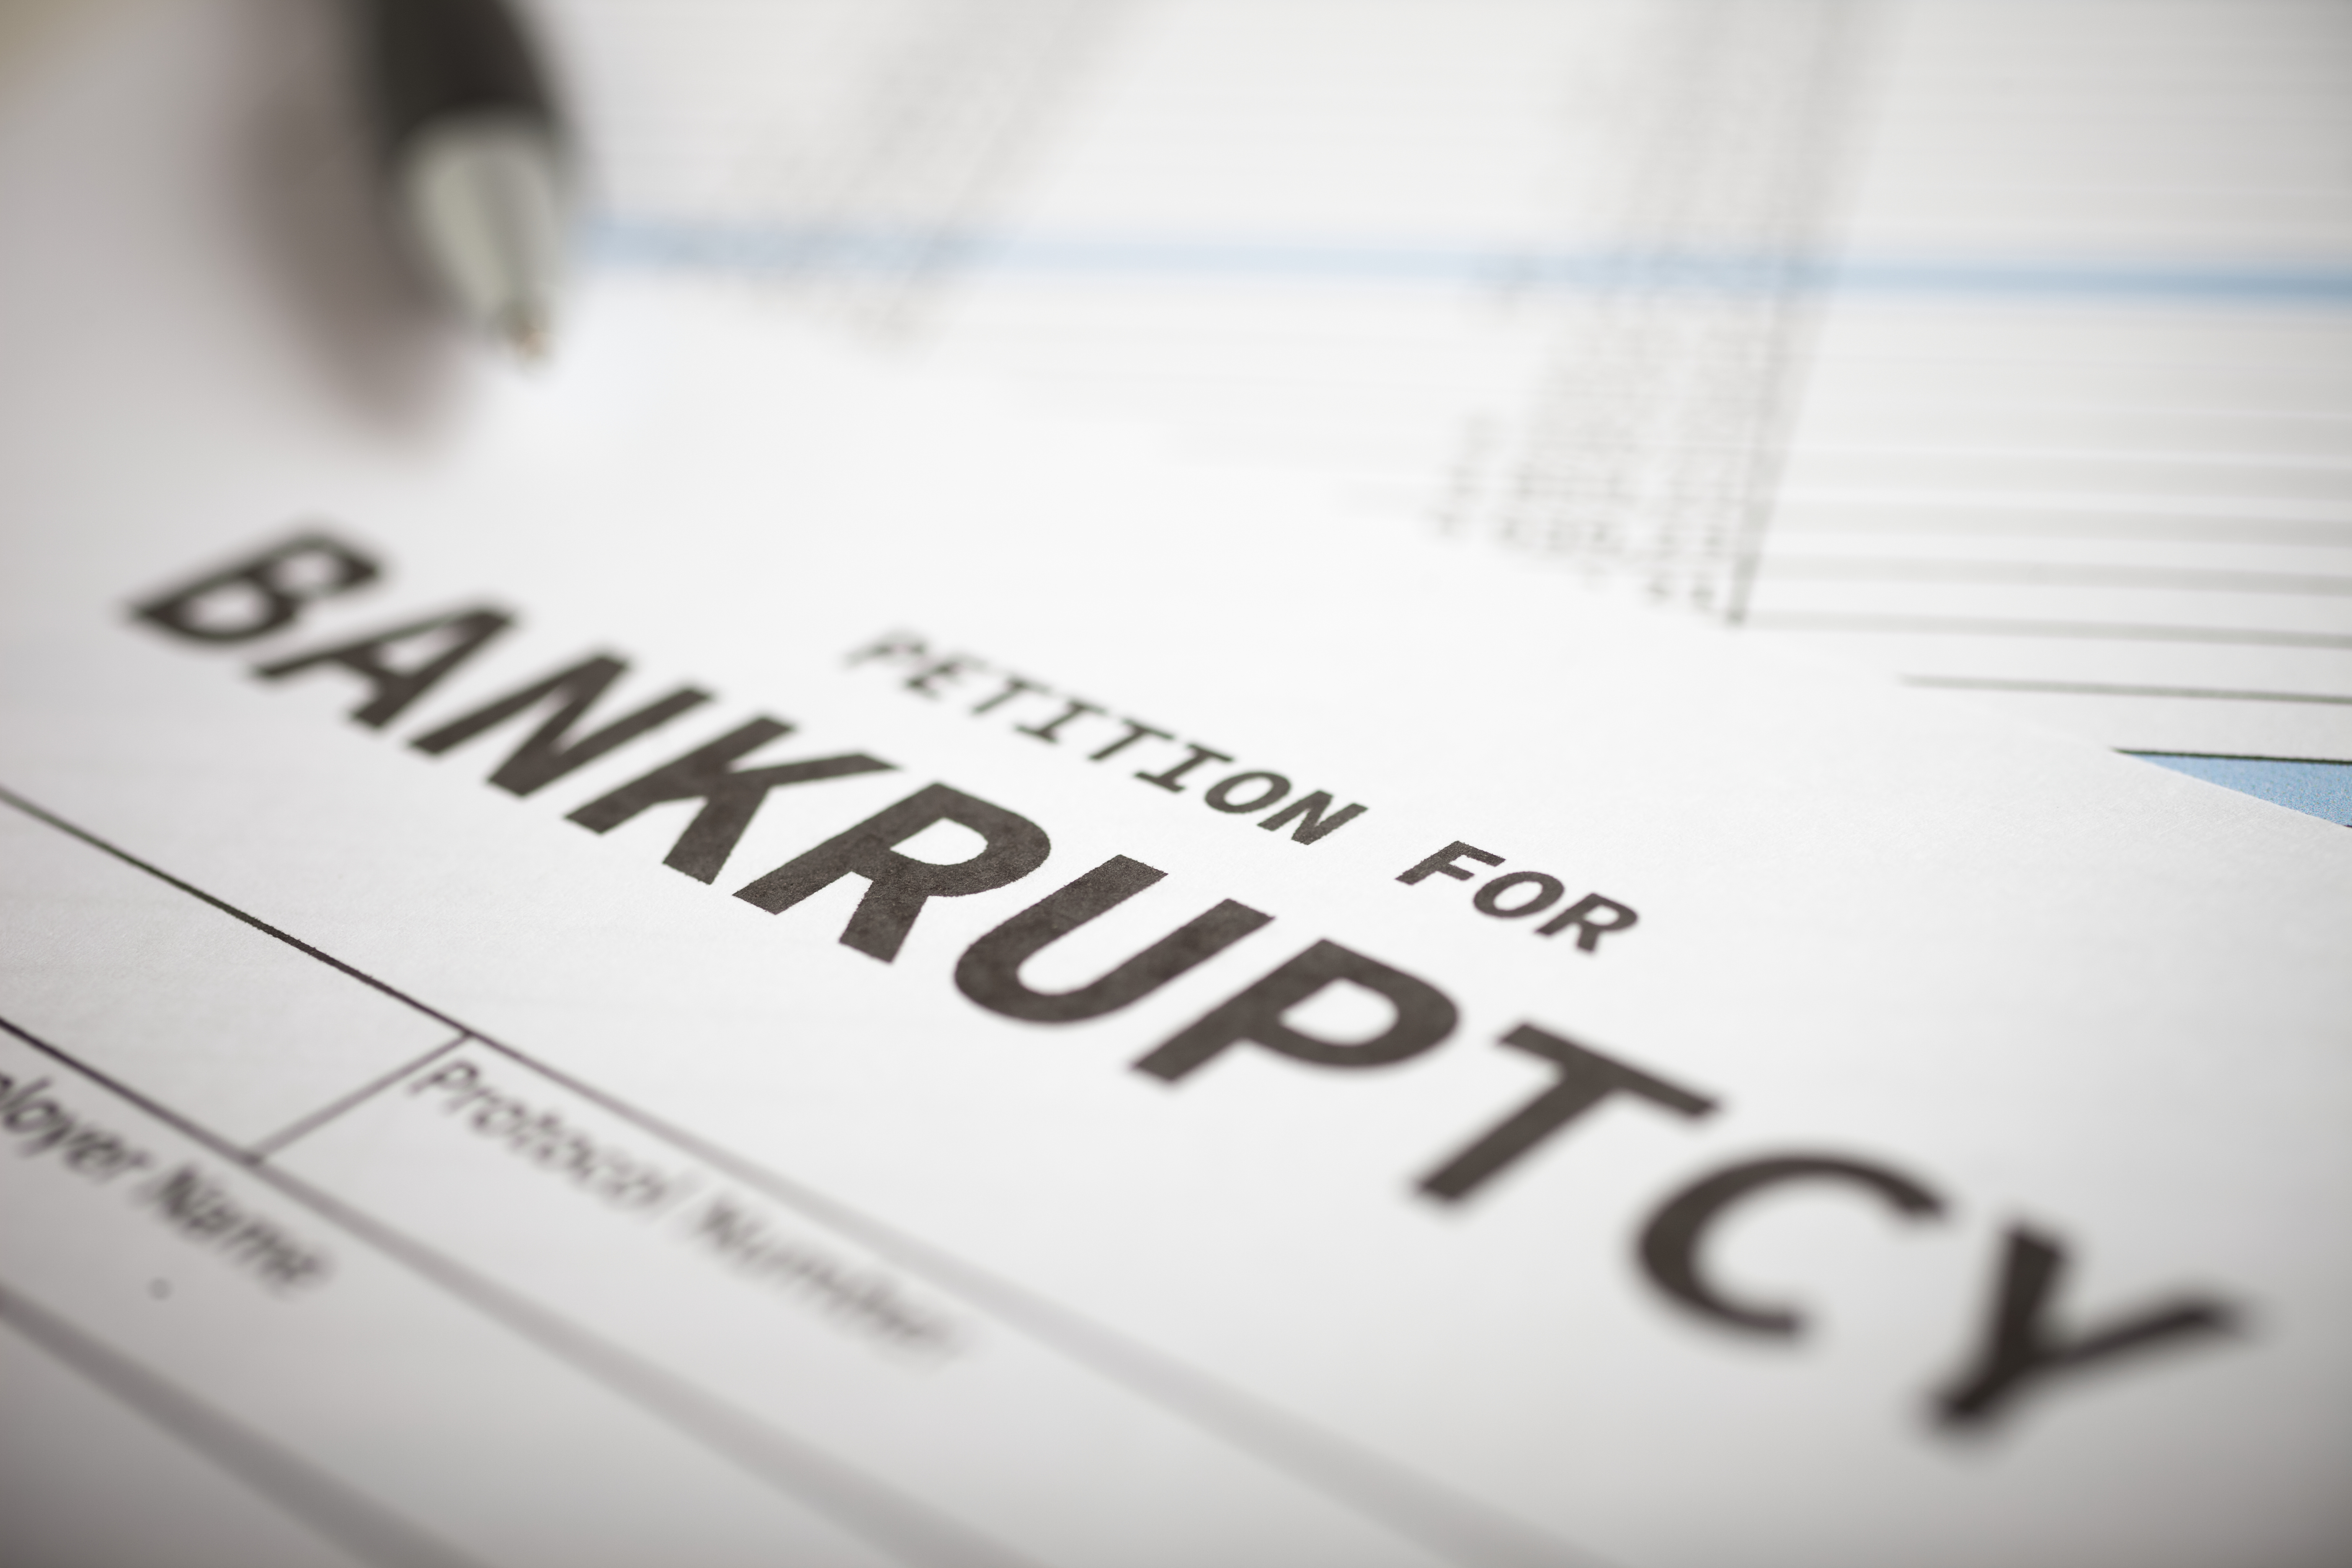 When You Need To File For Ch 13 Bankruptcy Call Price Law Group 866-210-1722